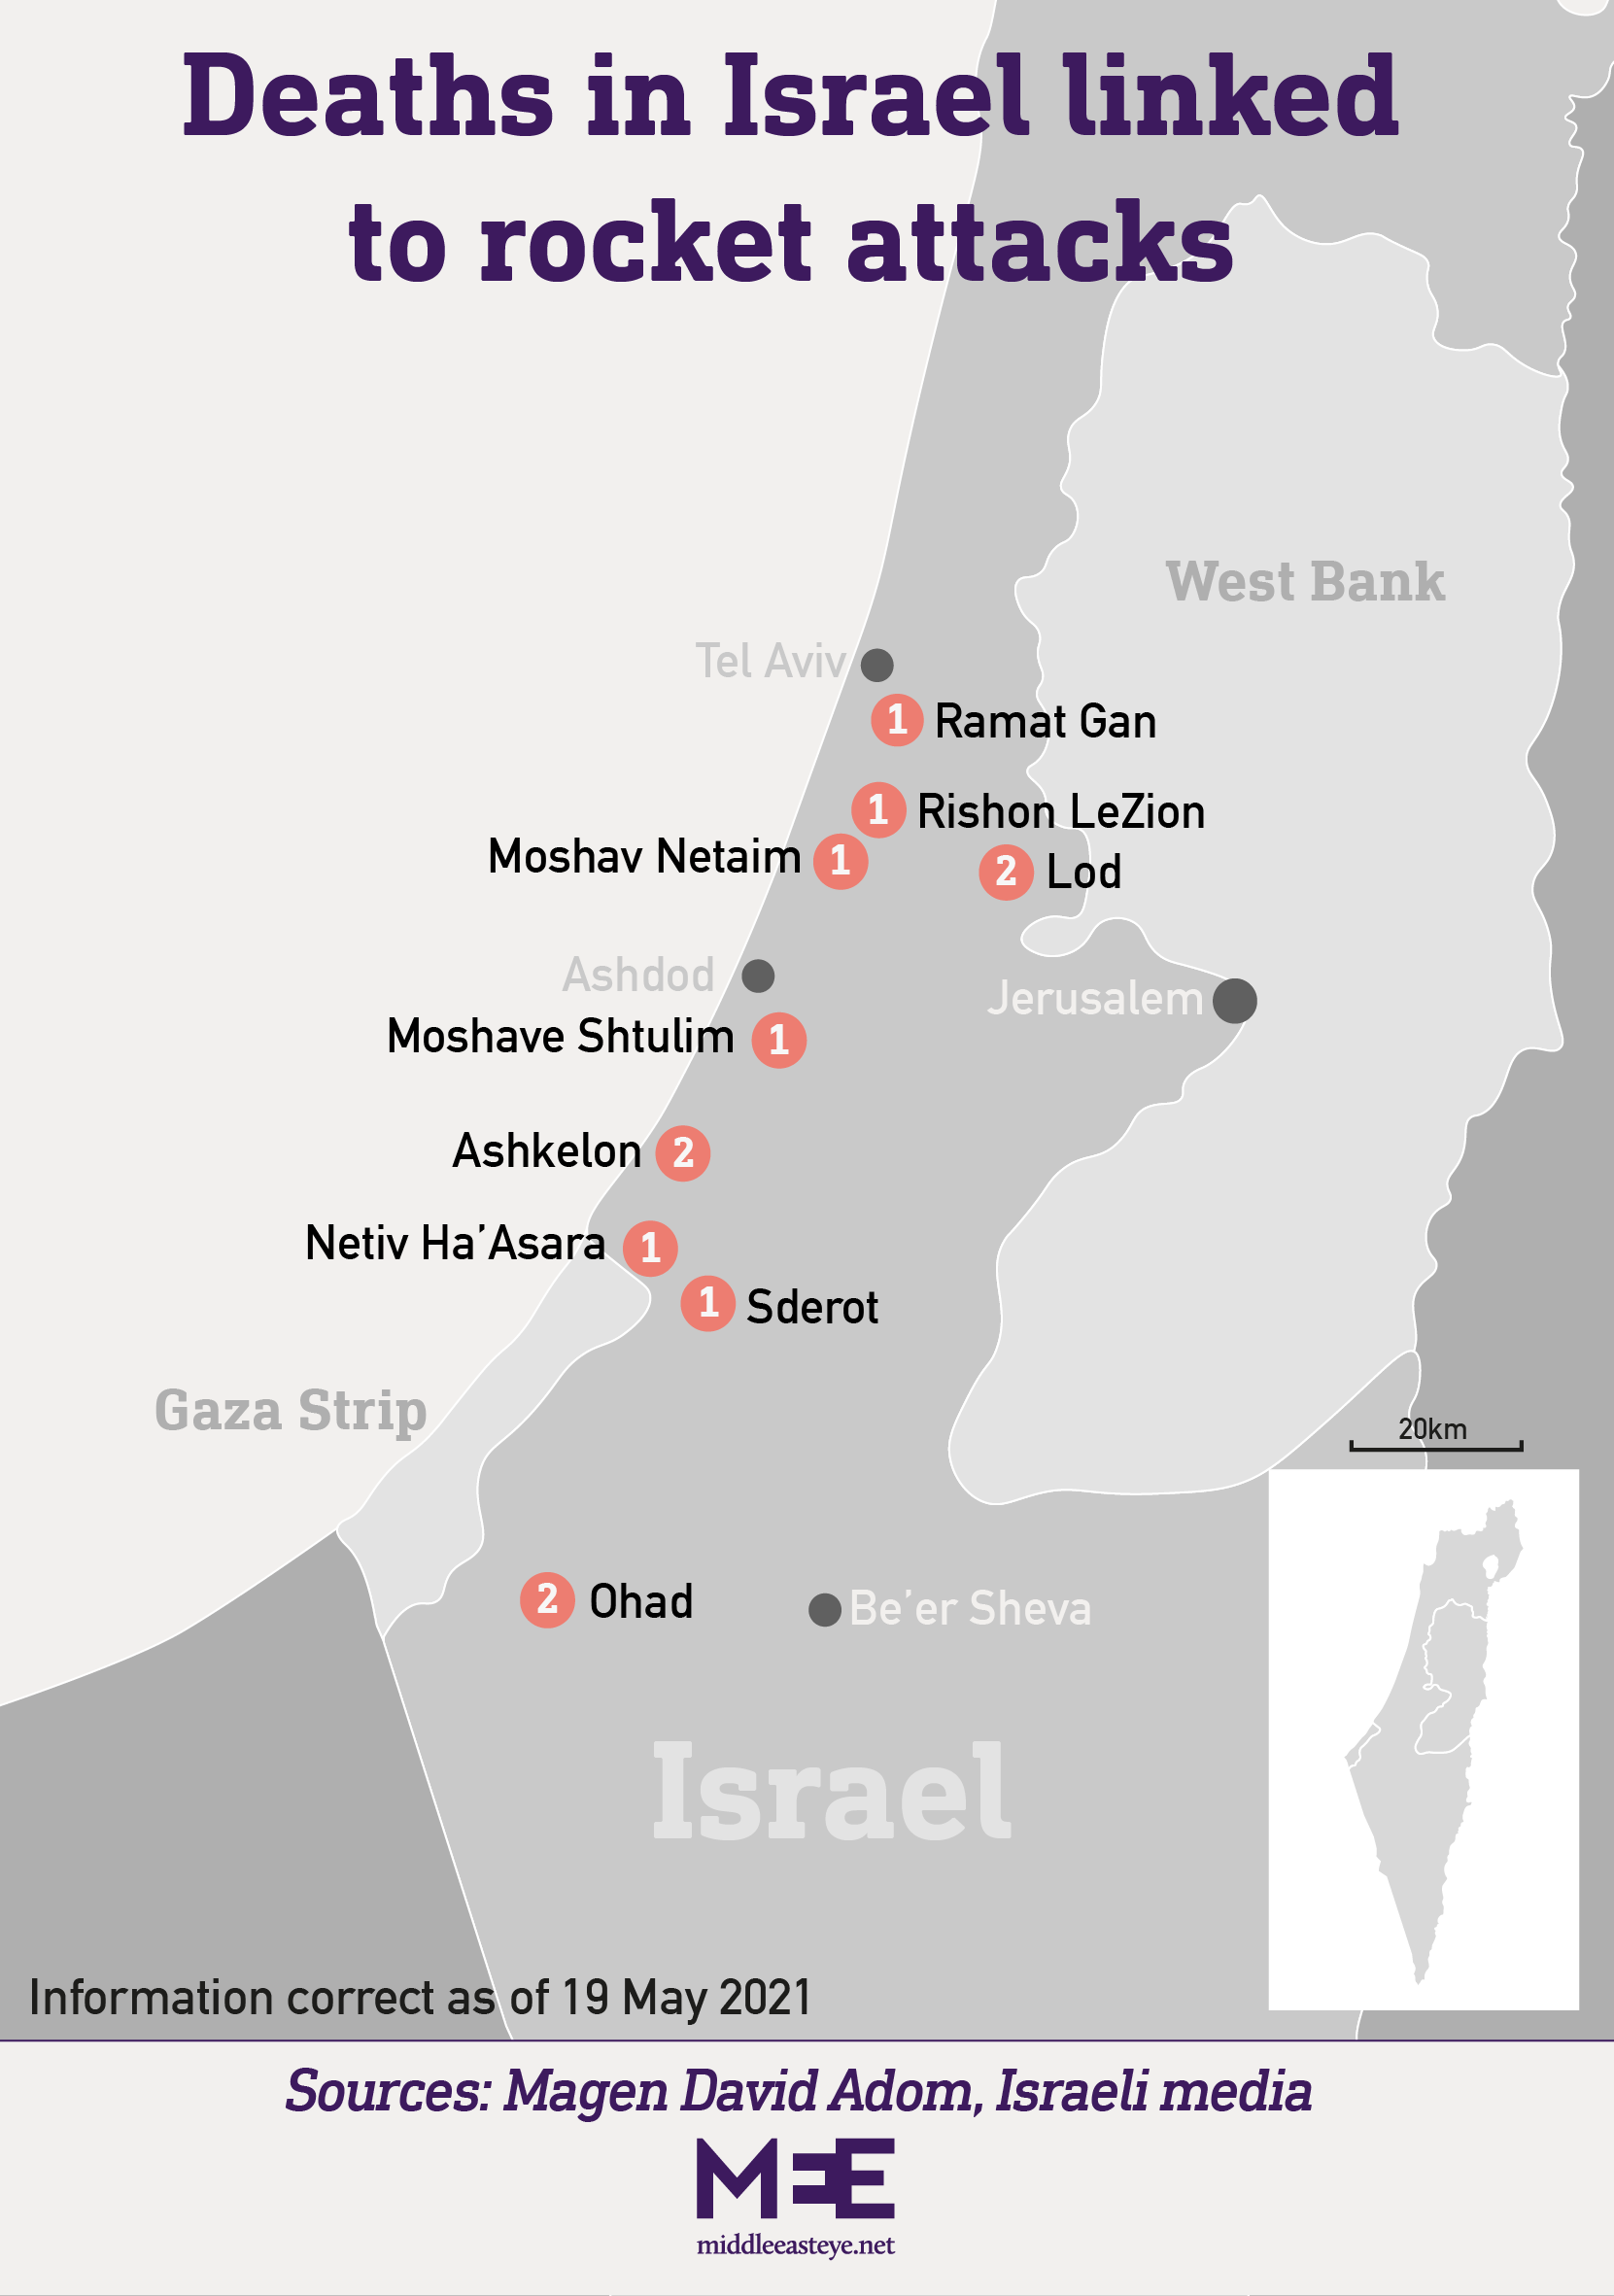 Deaths in Israel linked to rocket attacks